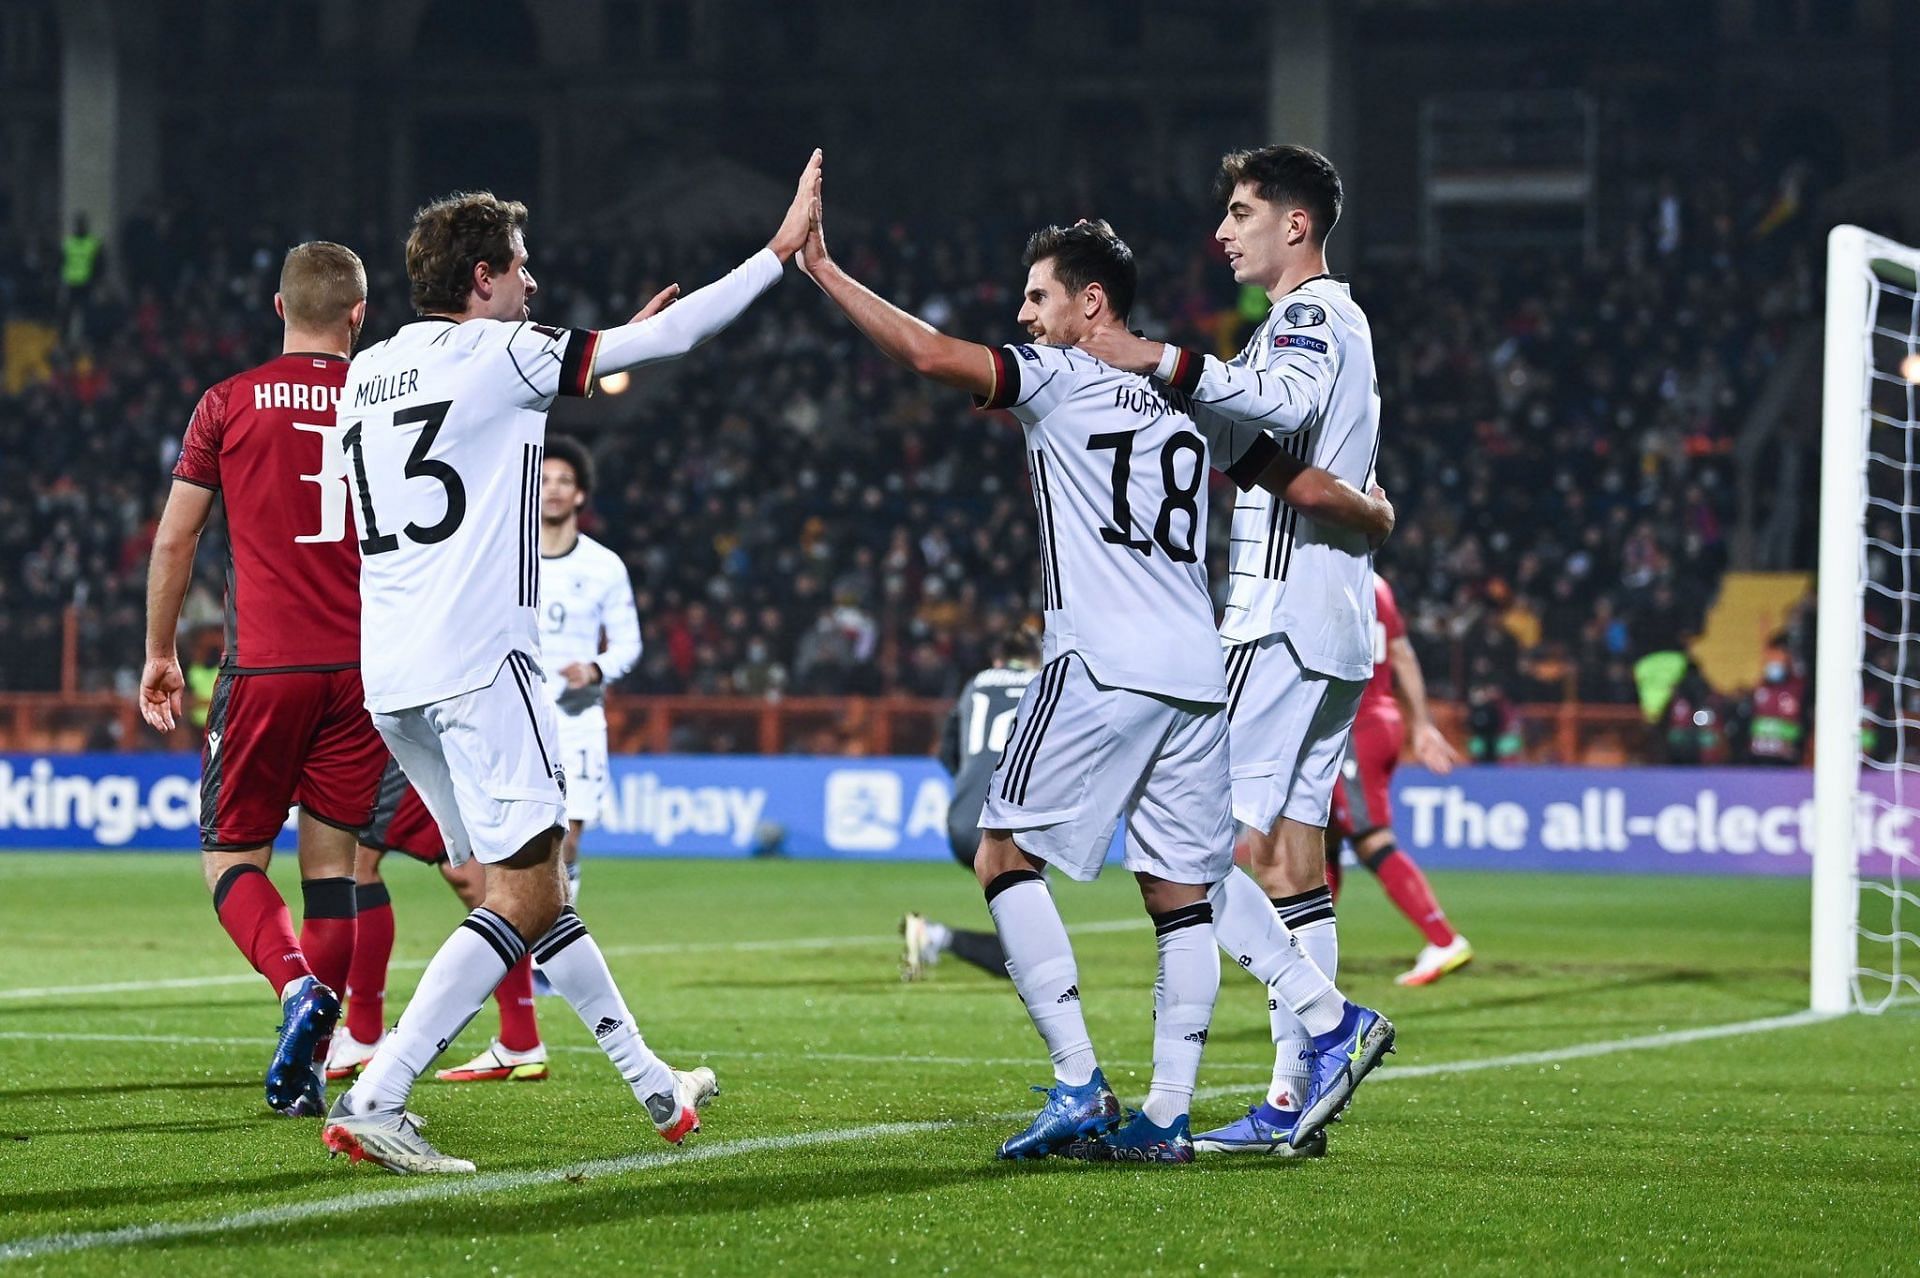 Germany are heading to the World Cup in Qatar after dominating their group